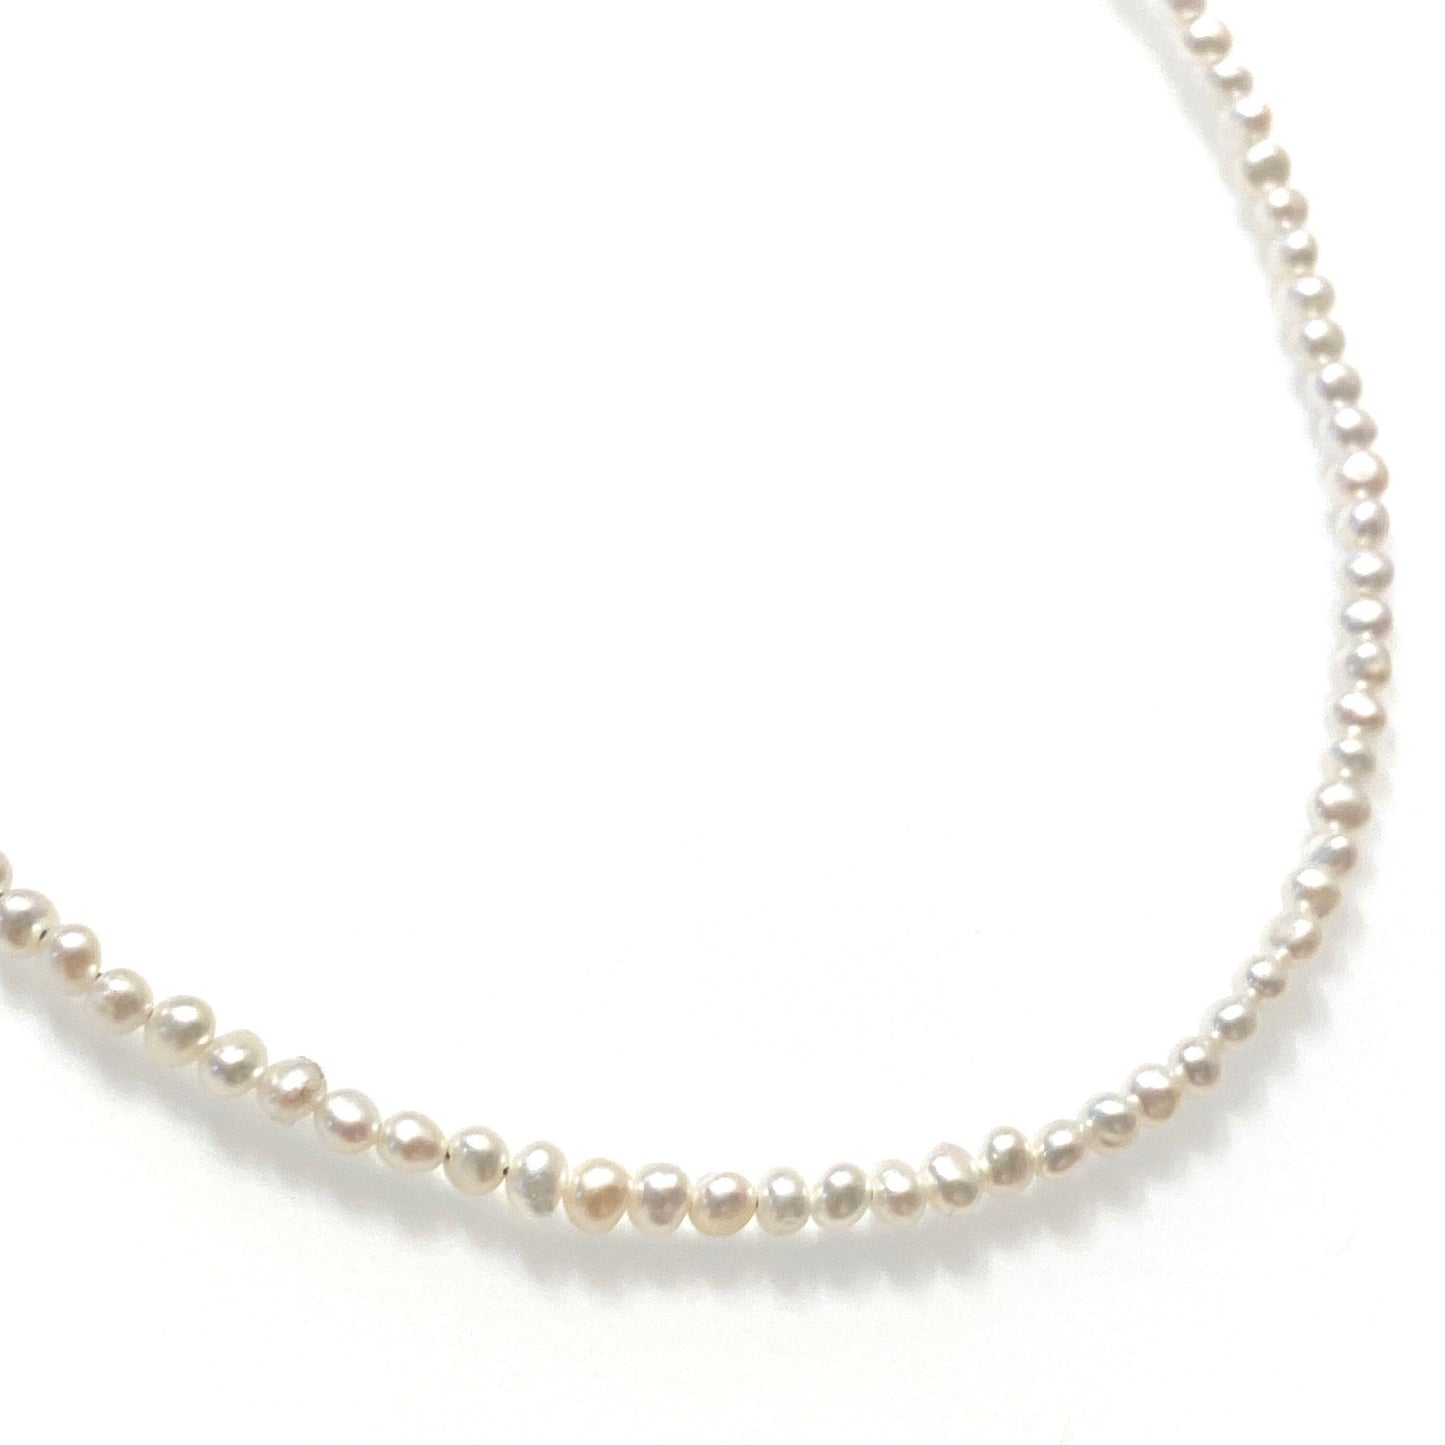 Baby freshwater pearl necklace